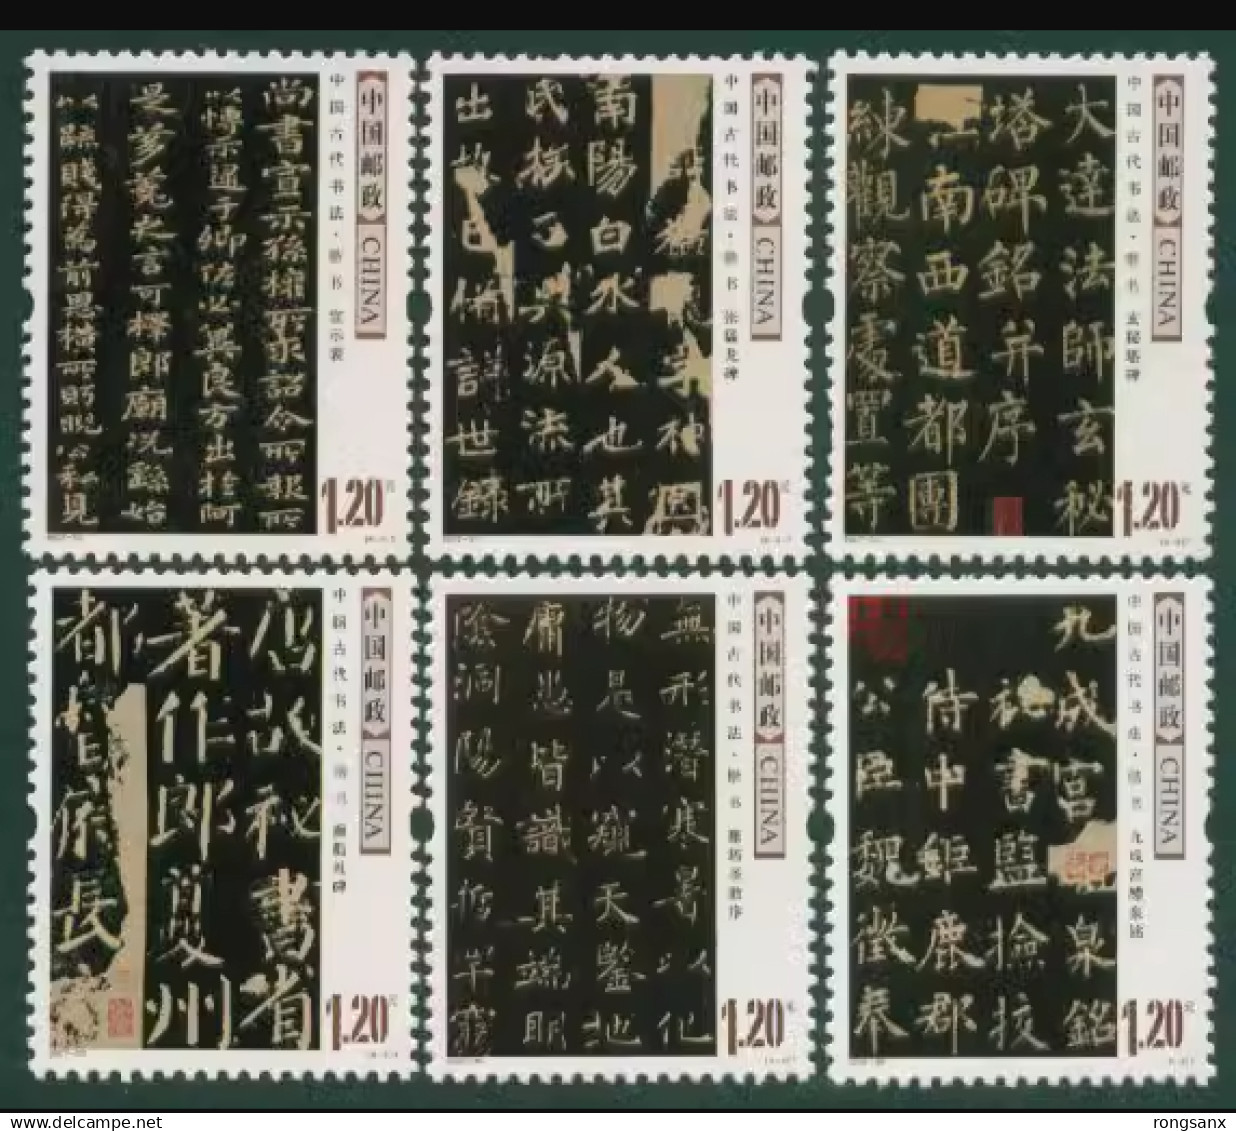 2007 CHINA Chinese Ancient Calligraphy(III) Regular Script 6V - Unused Stamps